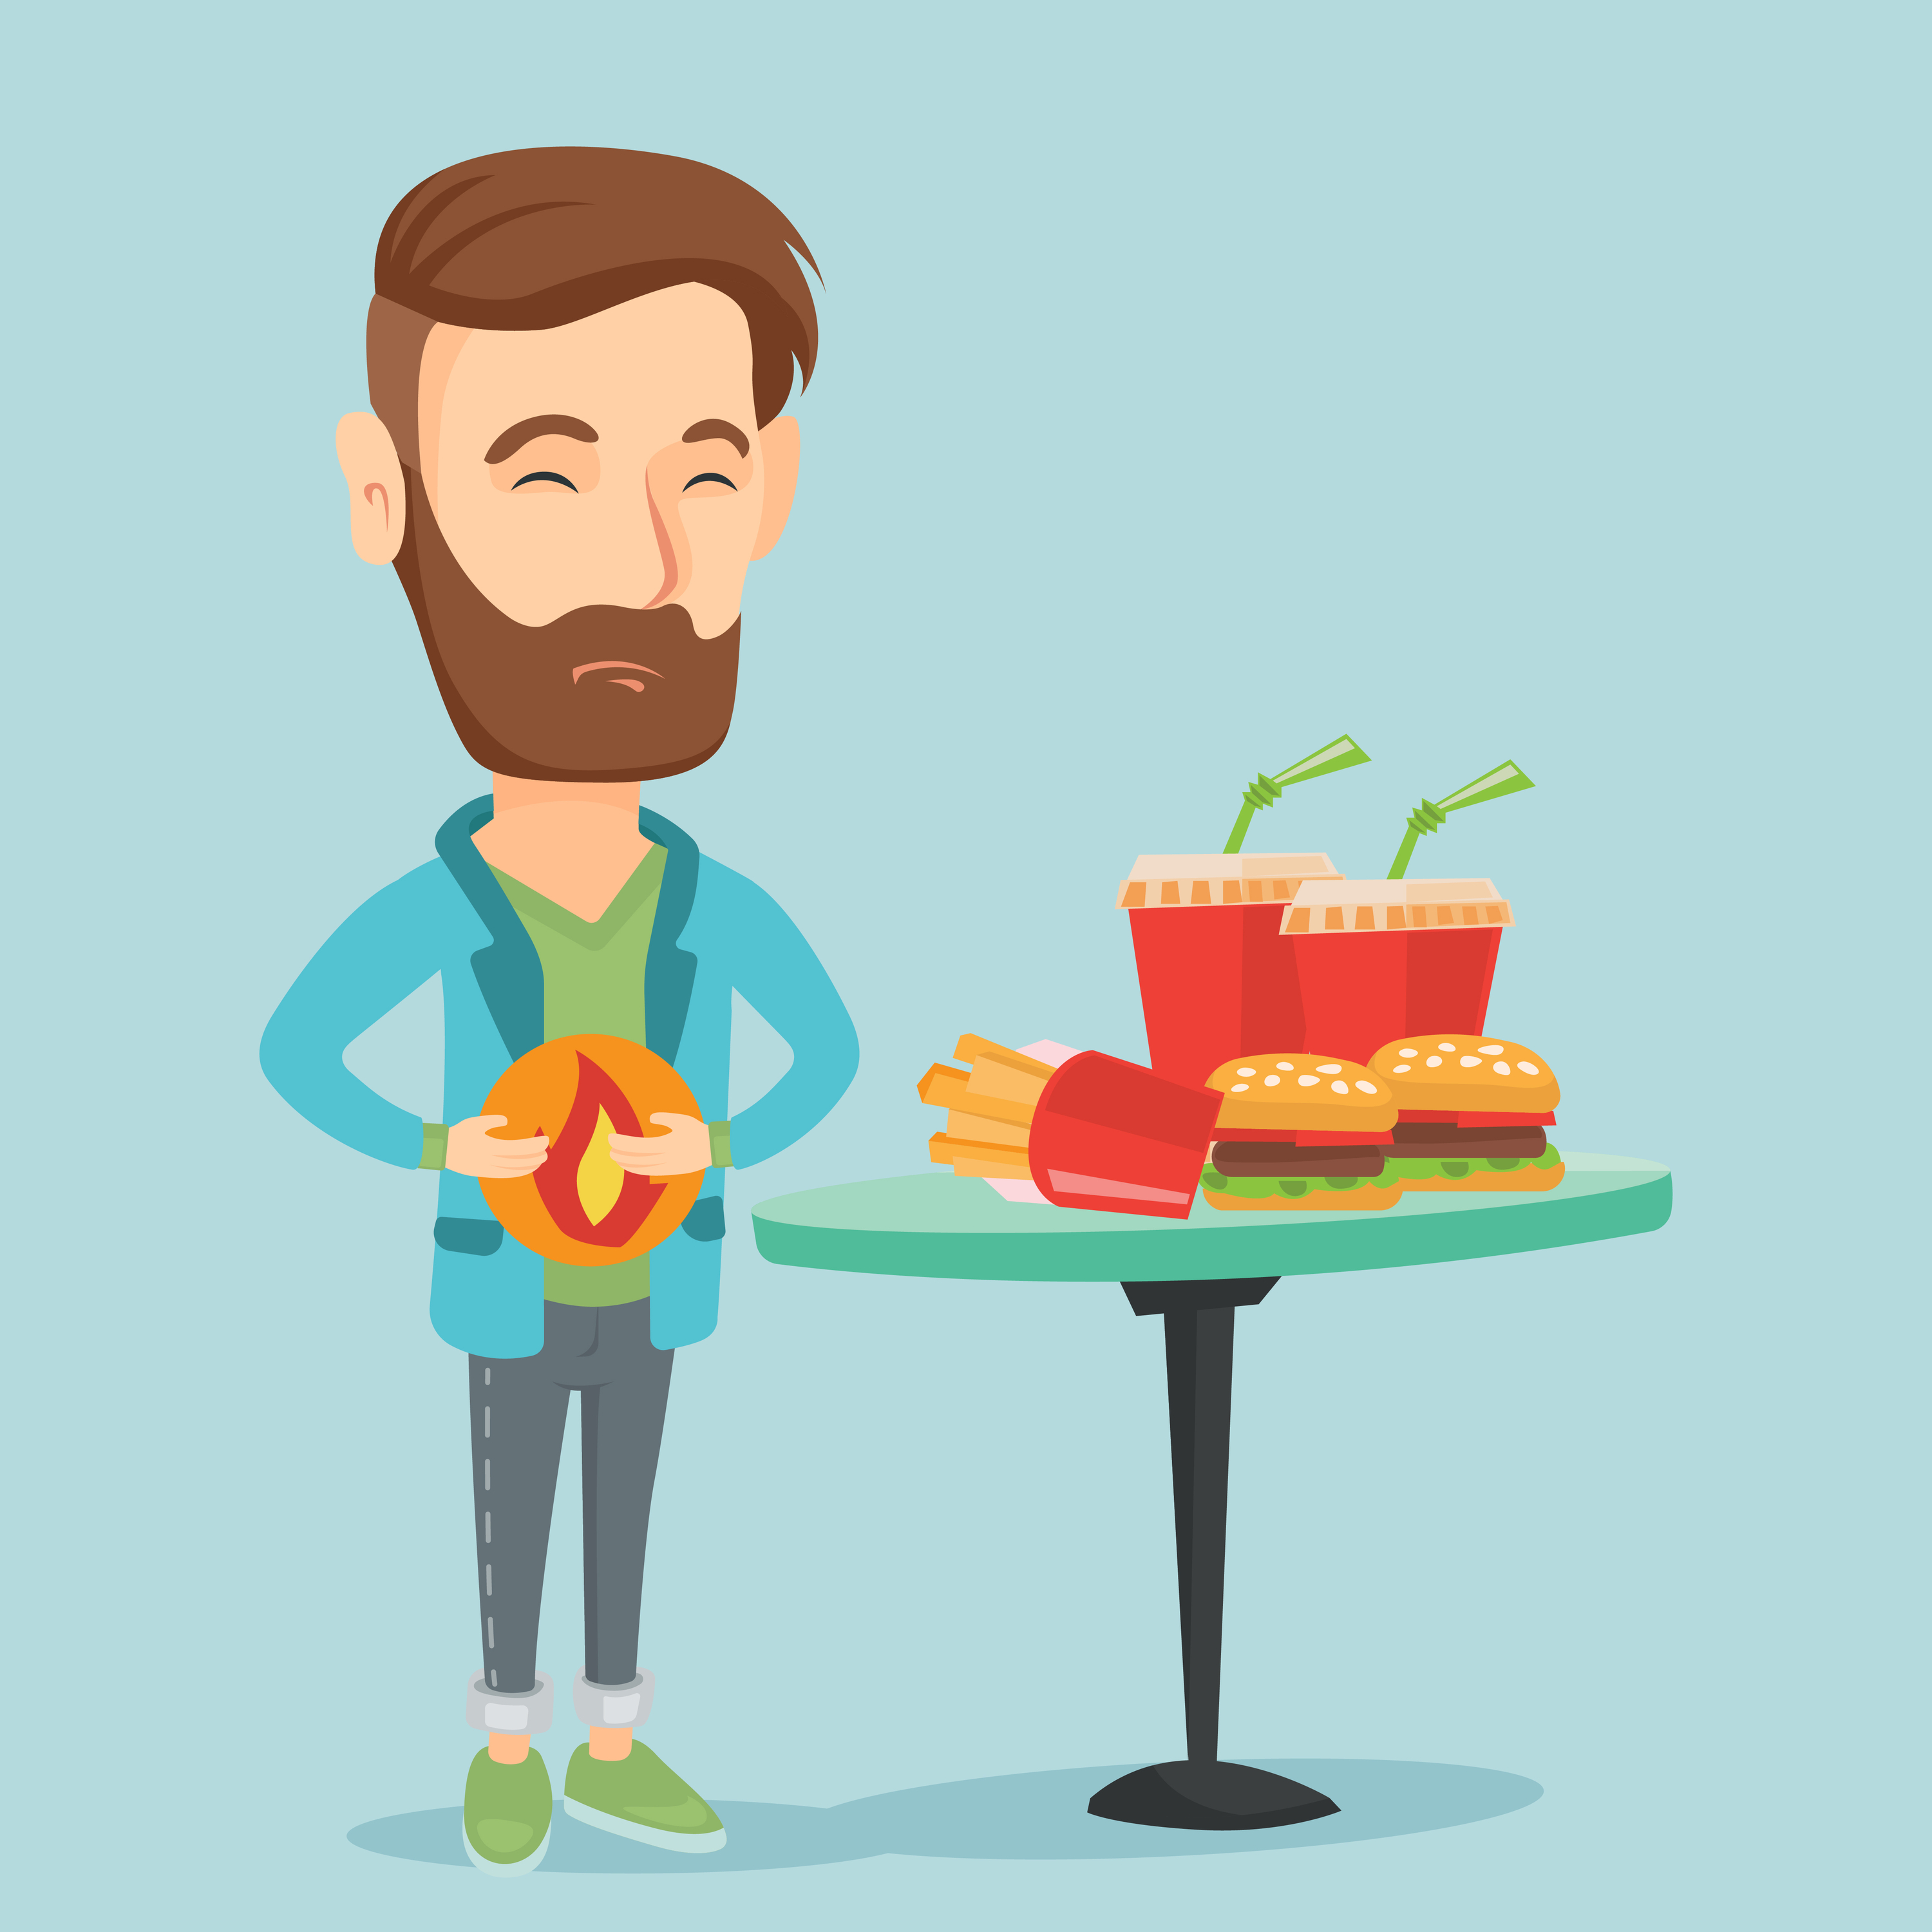 graphicstock-caucasian-sad-man-having-stomach-ache-from-heartburn-young-man-suffering-from-heartburn-upset-man-having-stomach-ache-after-fast-food-vector-flat-design-illustration-square-layout_HQlZGGkPUb_L